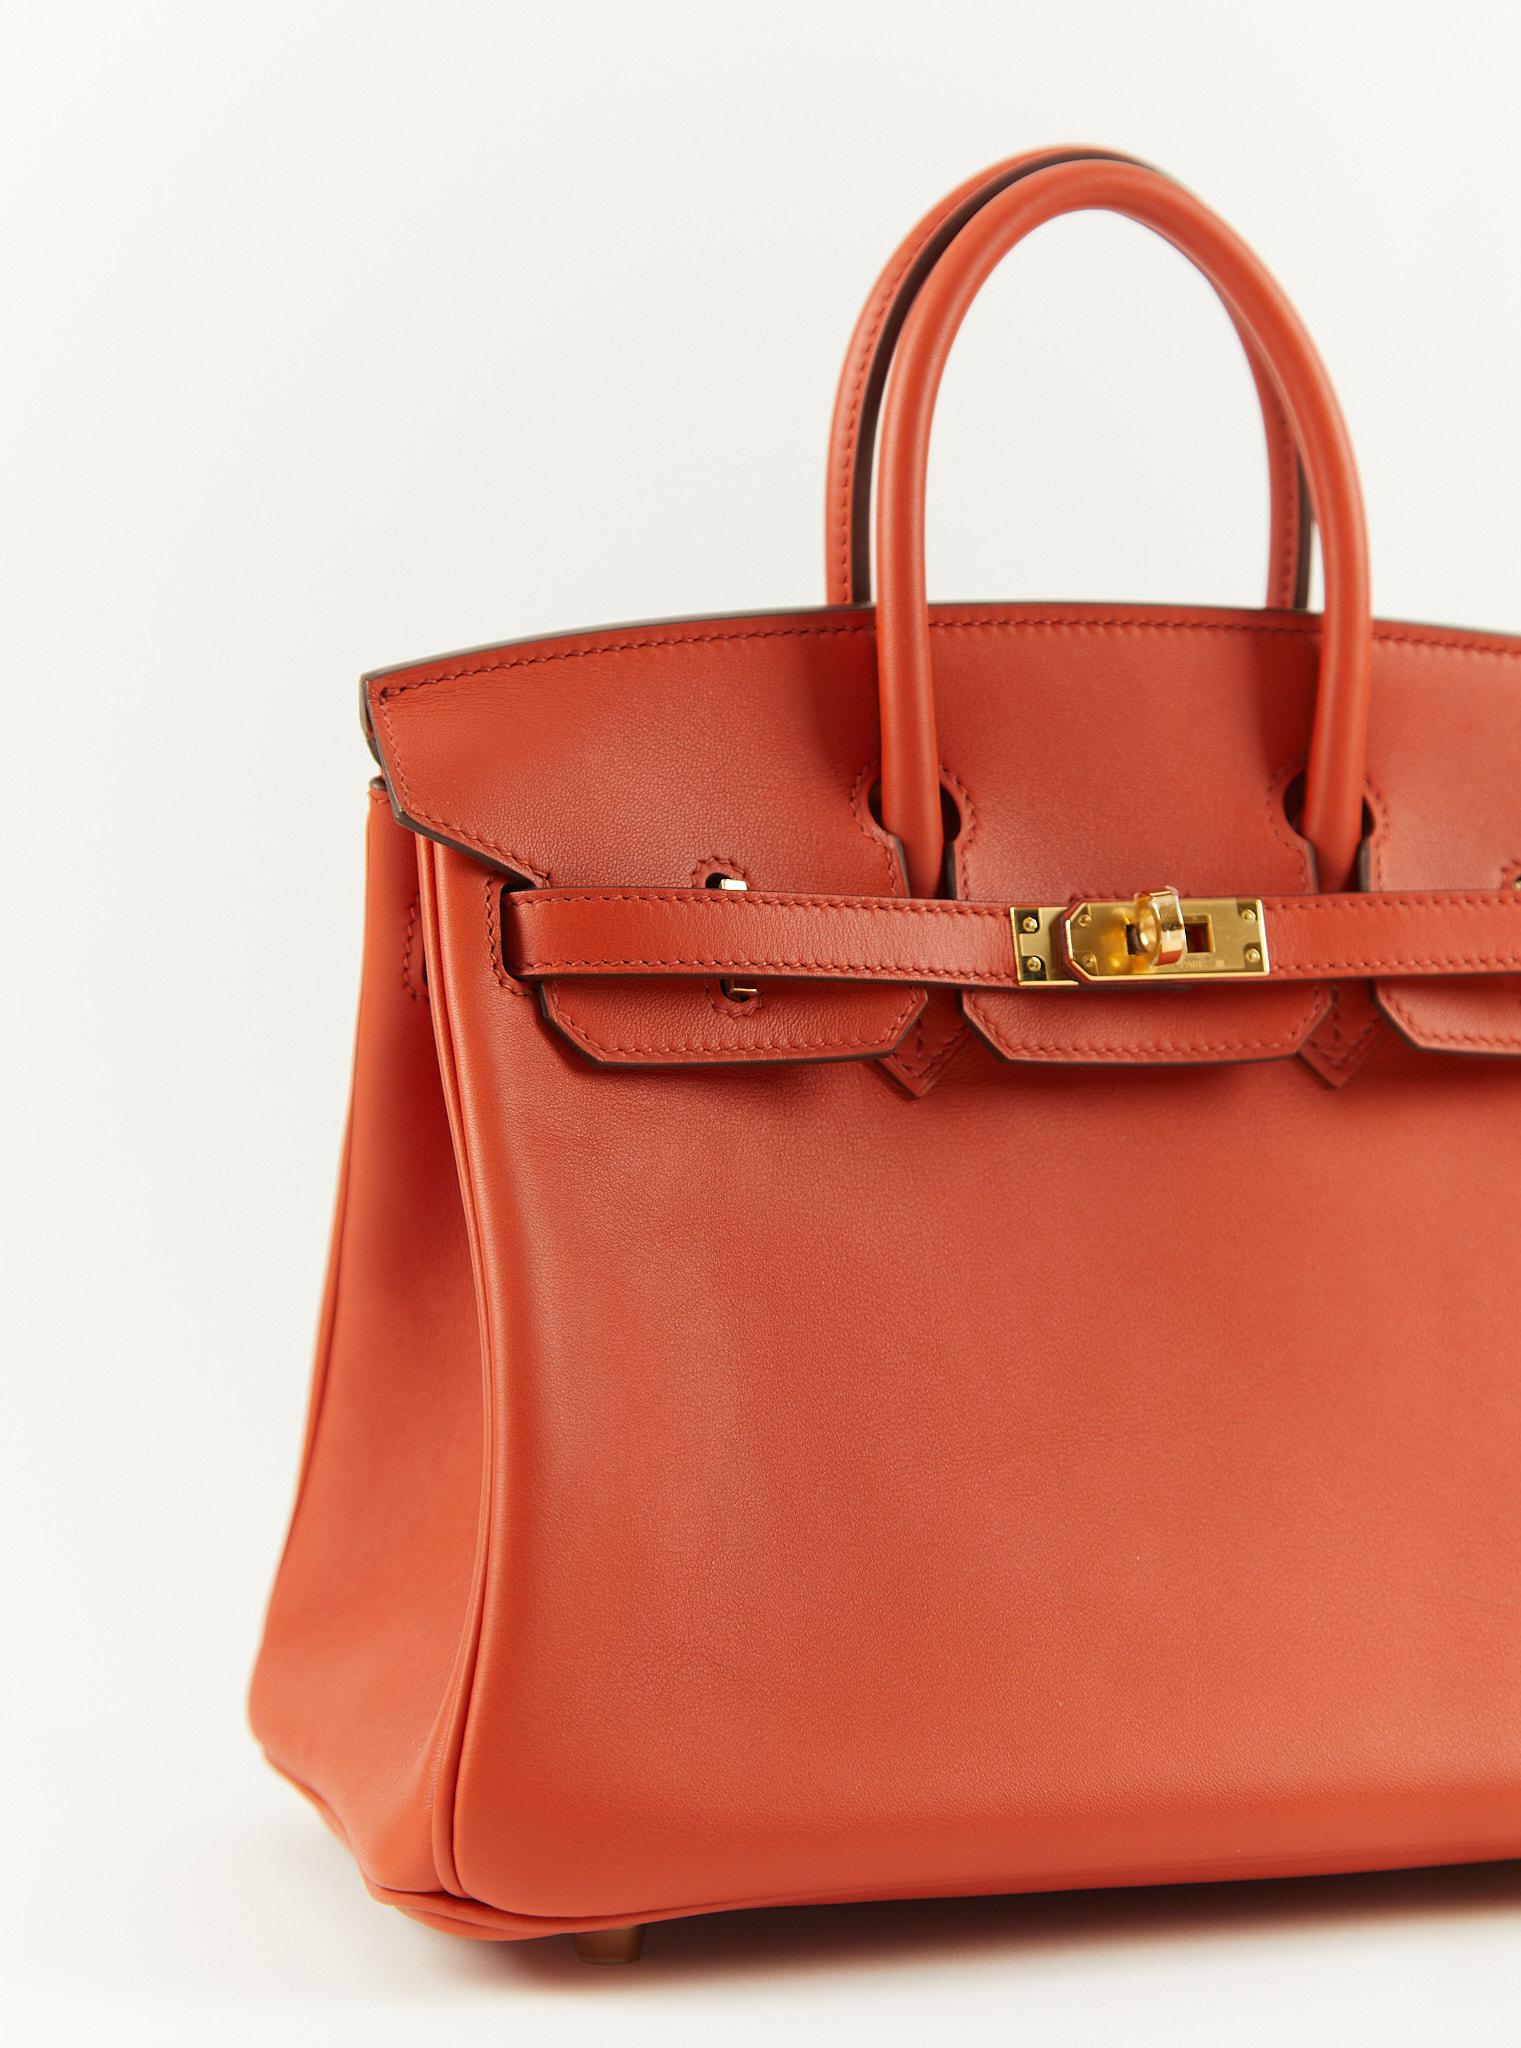 HERMÈS BIRKIN 25CM TERRE BATTUE Swift Leather with Gold Hardware In Excellent Condition For Sale In London, GB